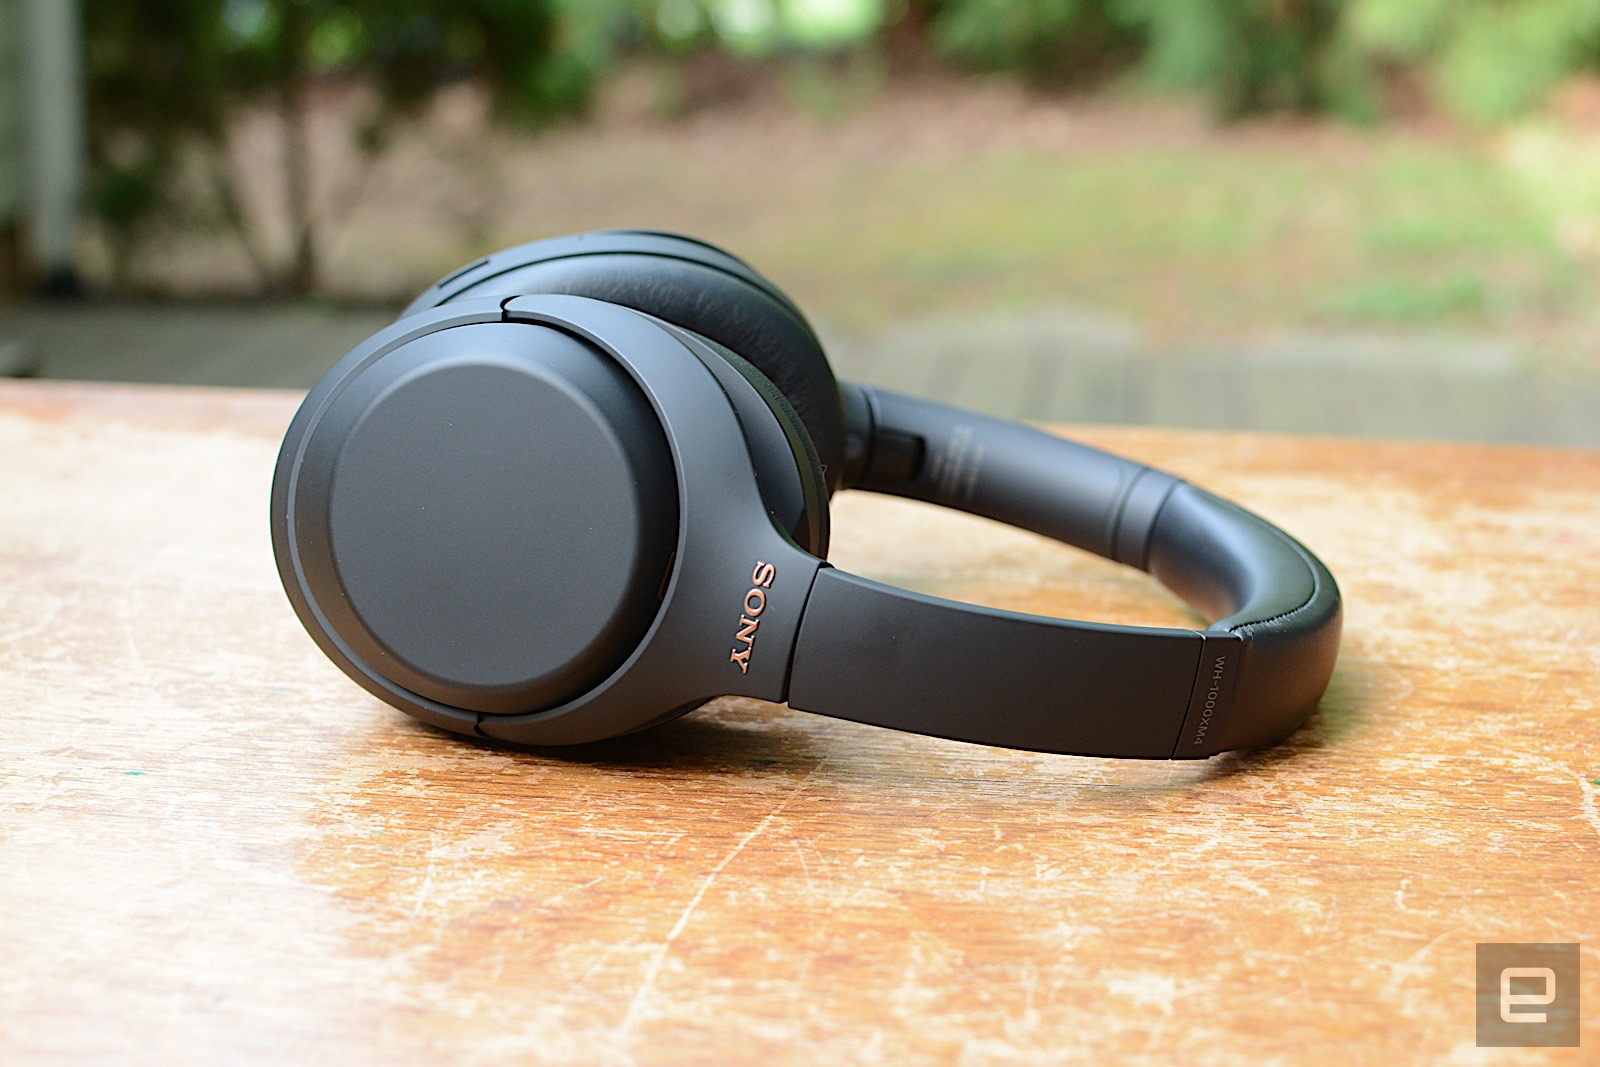 Sony’s WH-1000XM4 ANC headphones drop again to $278 at Amazon